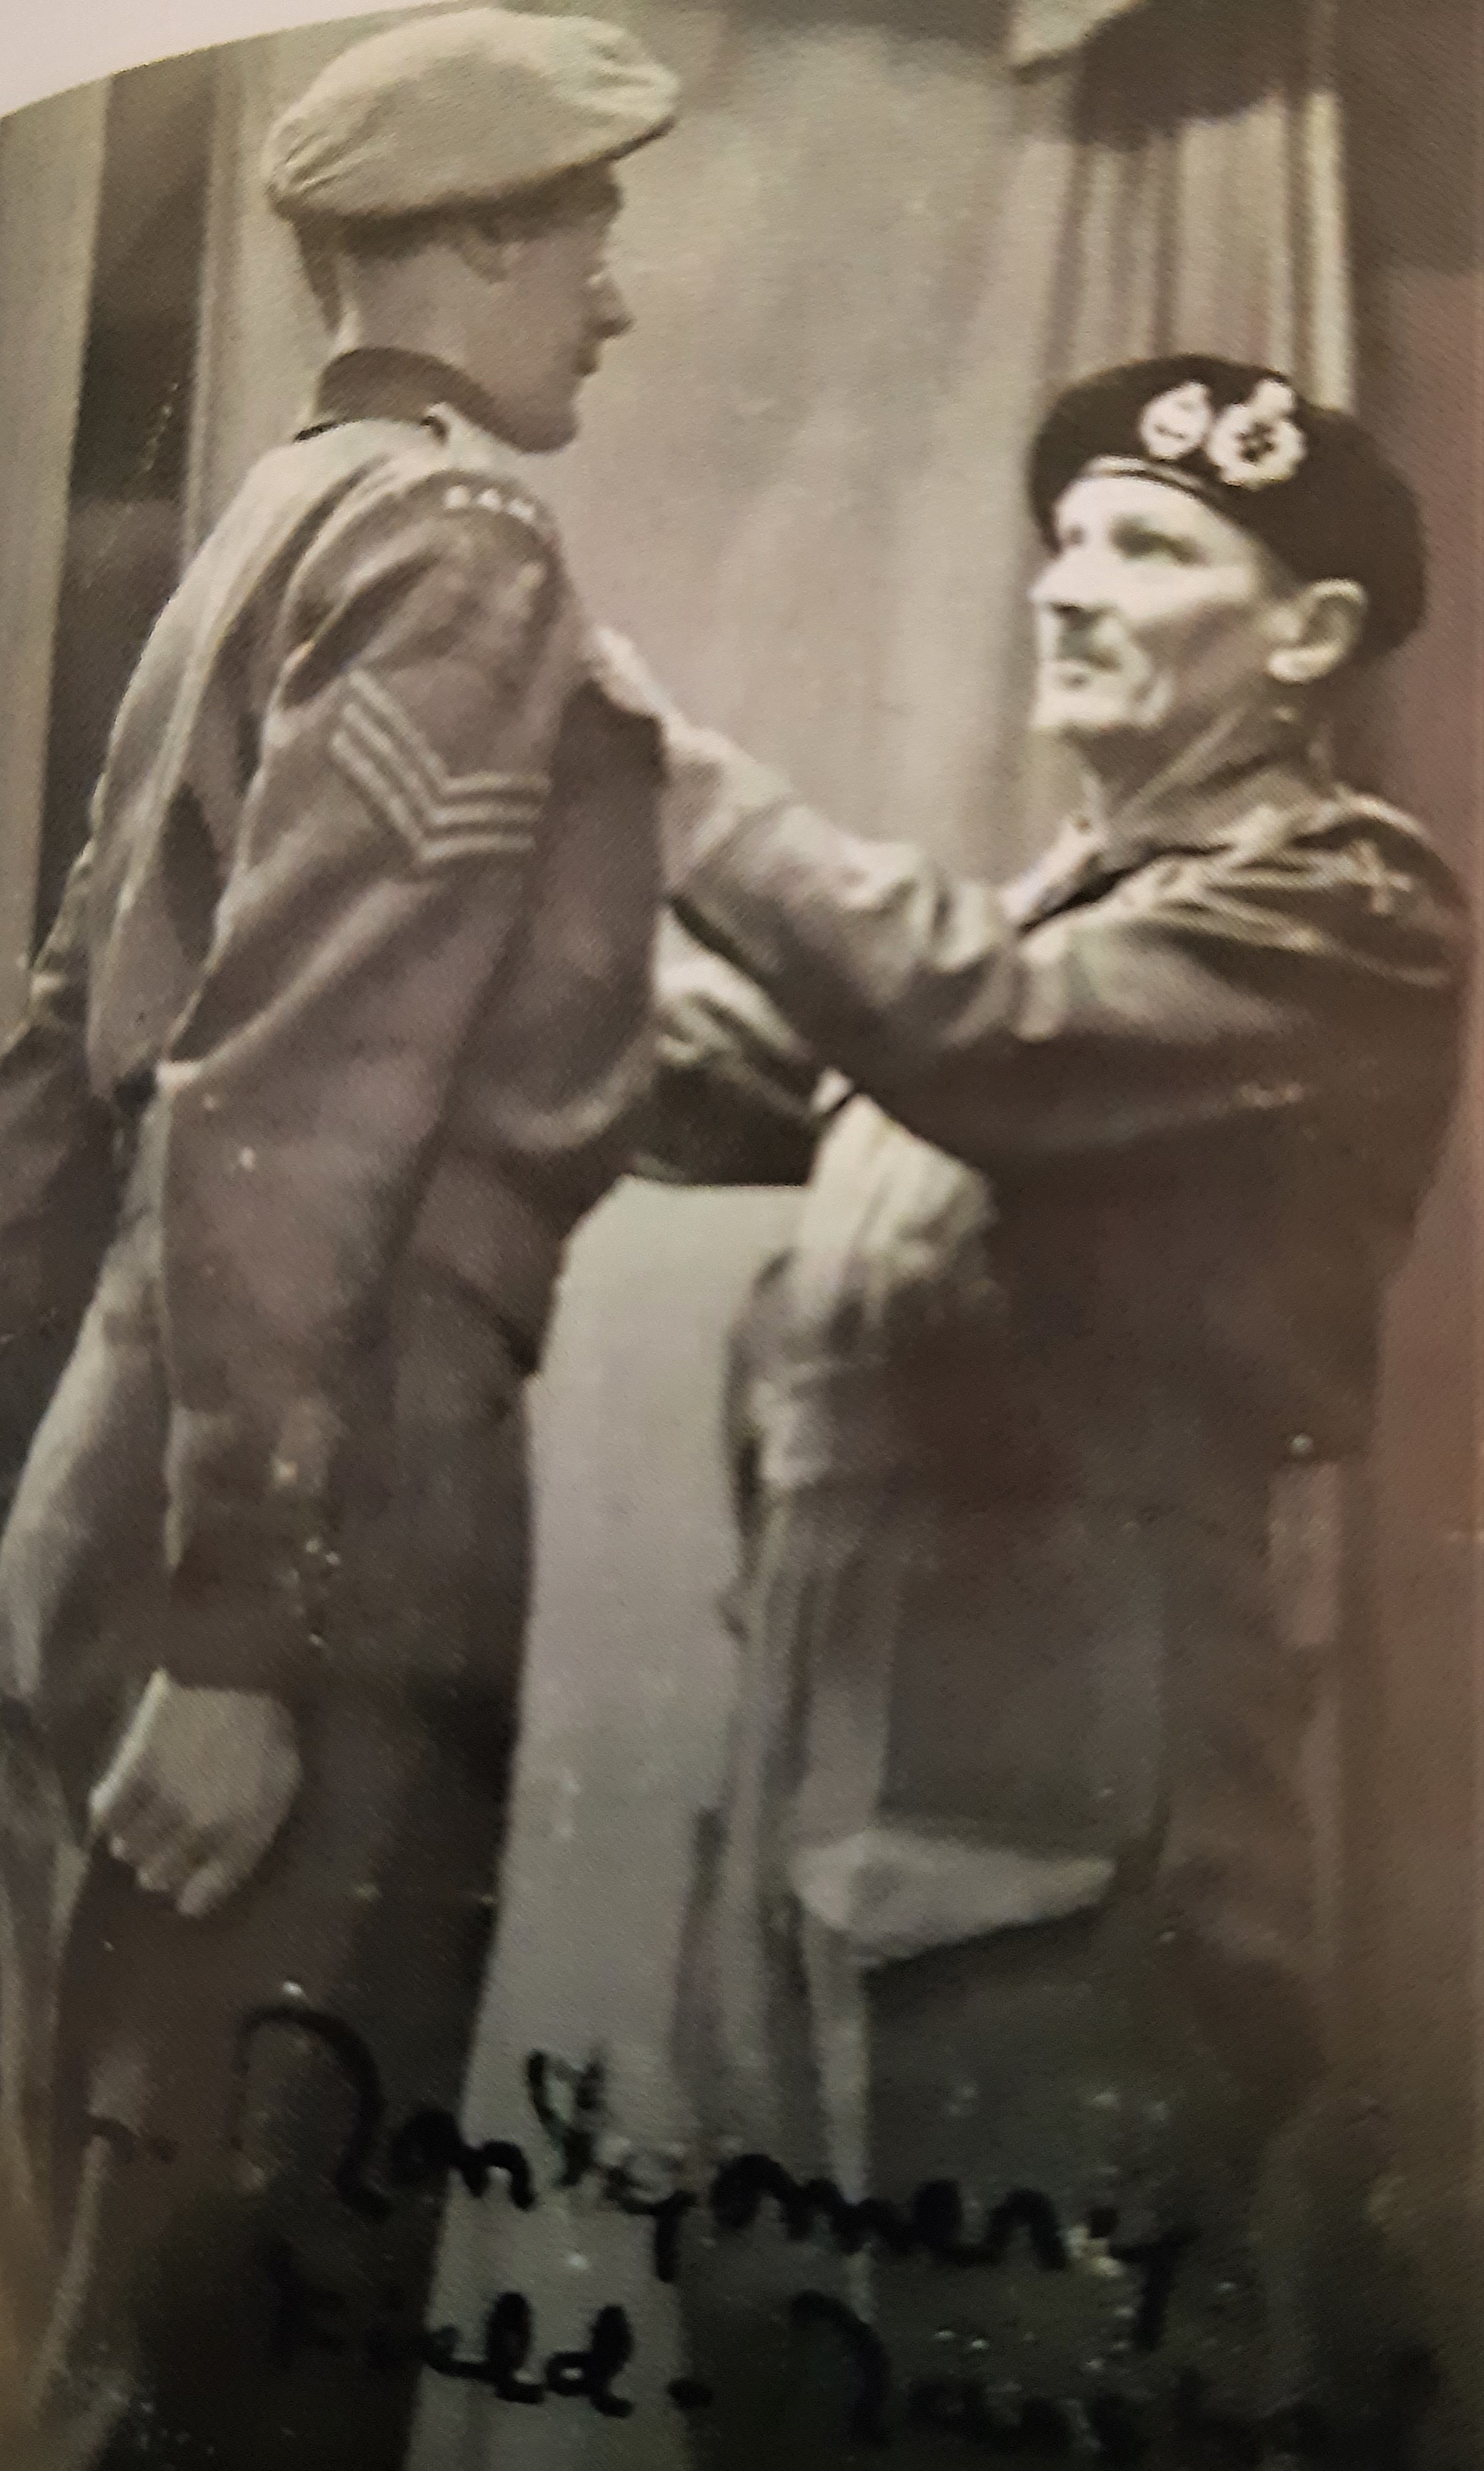 Jesse Evans, born Cefn Mawr, July 17, 1917, pictured receiving his BEM from Field Marshall Montgomery.